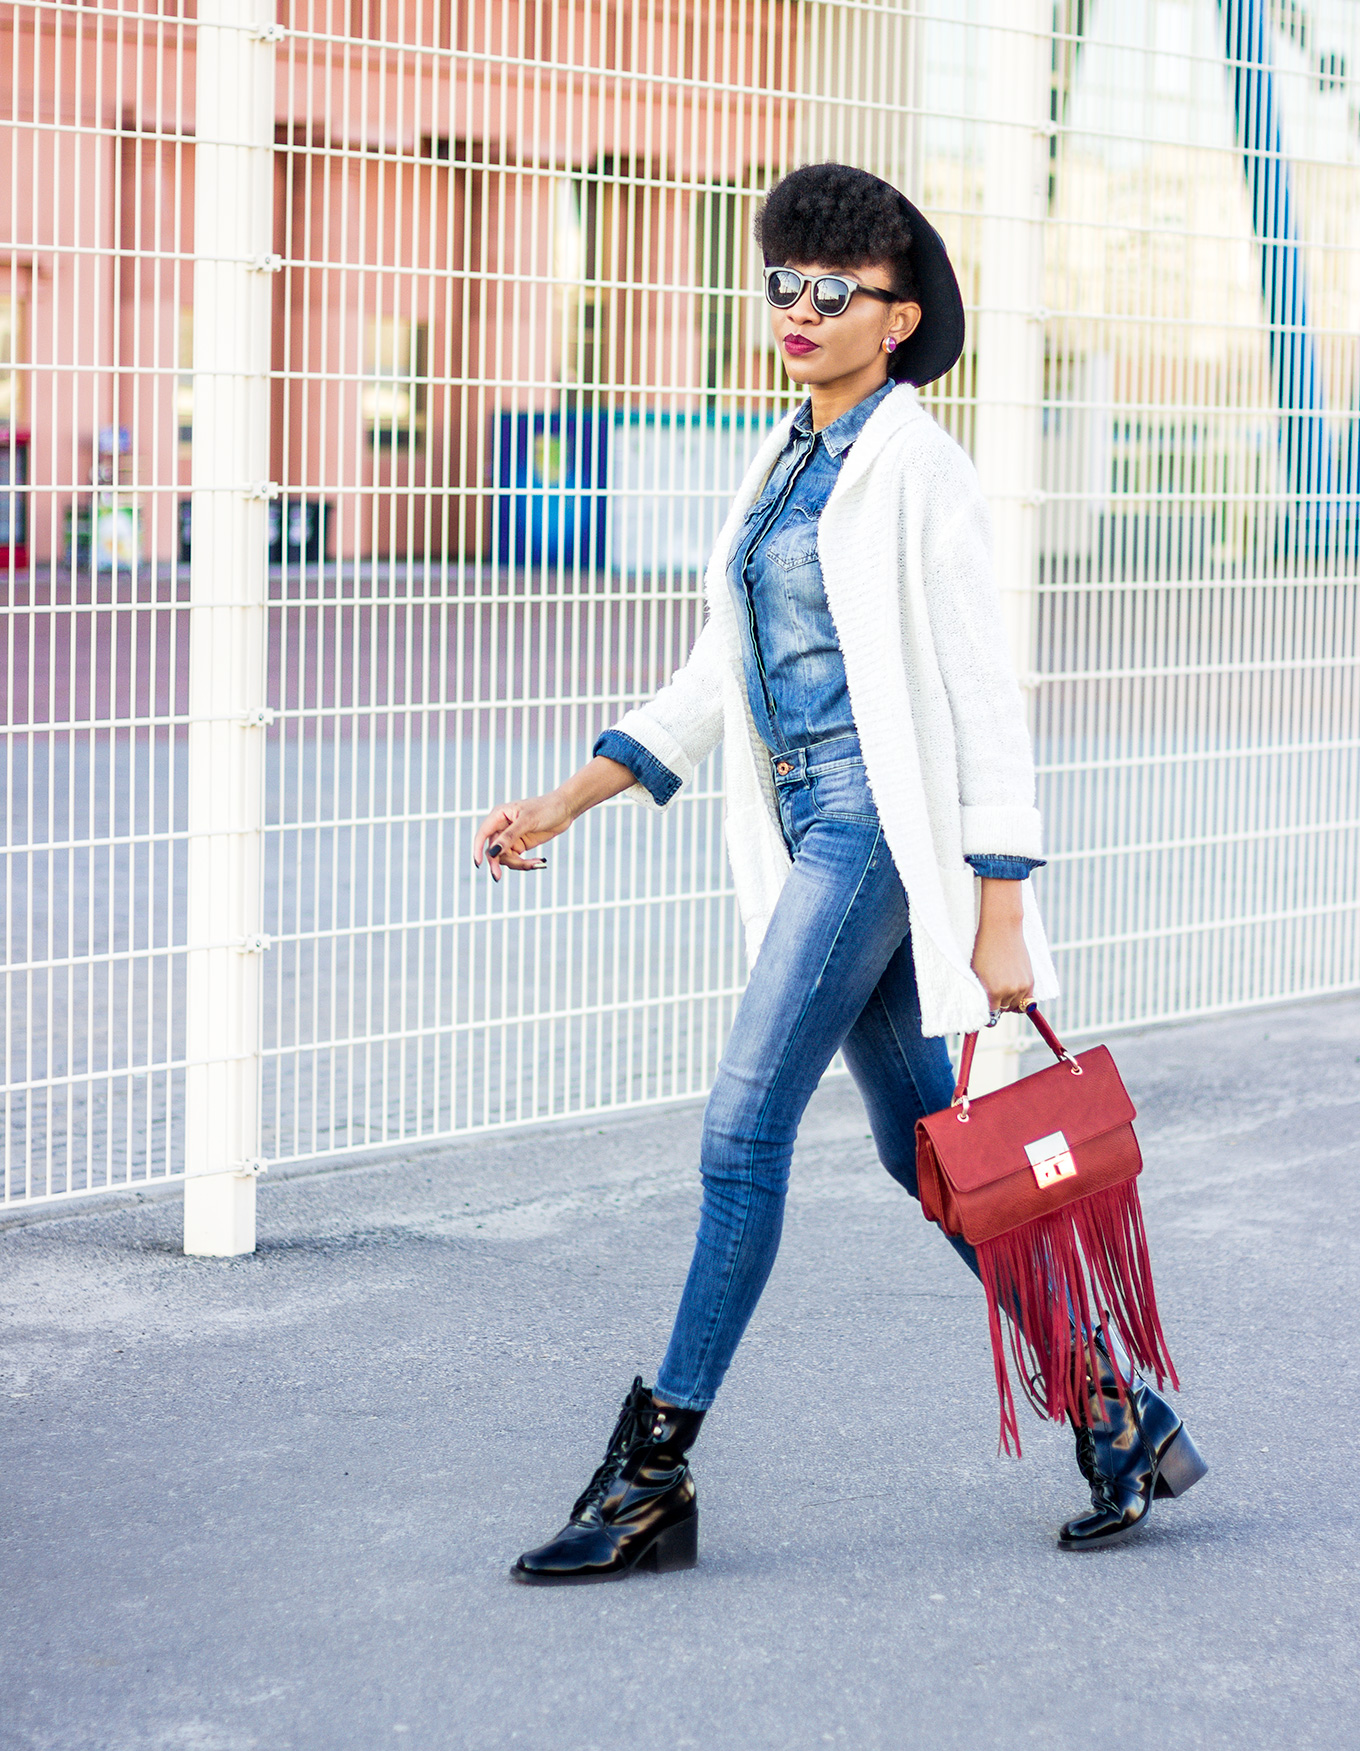 stylish double denim outfit